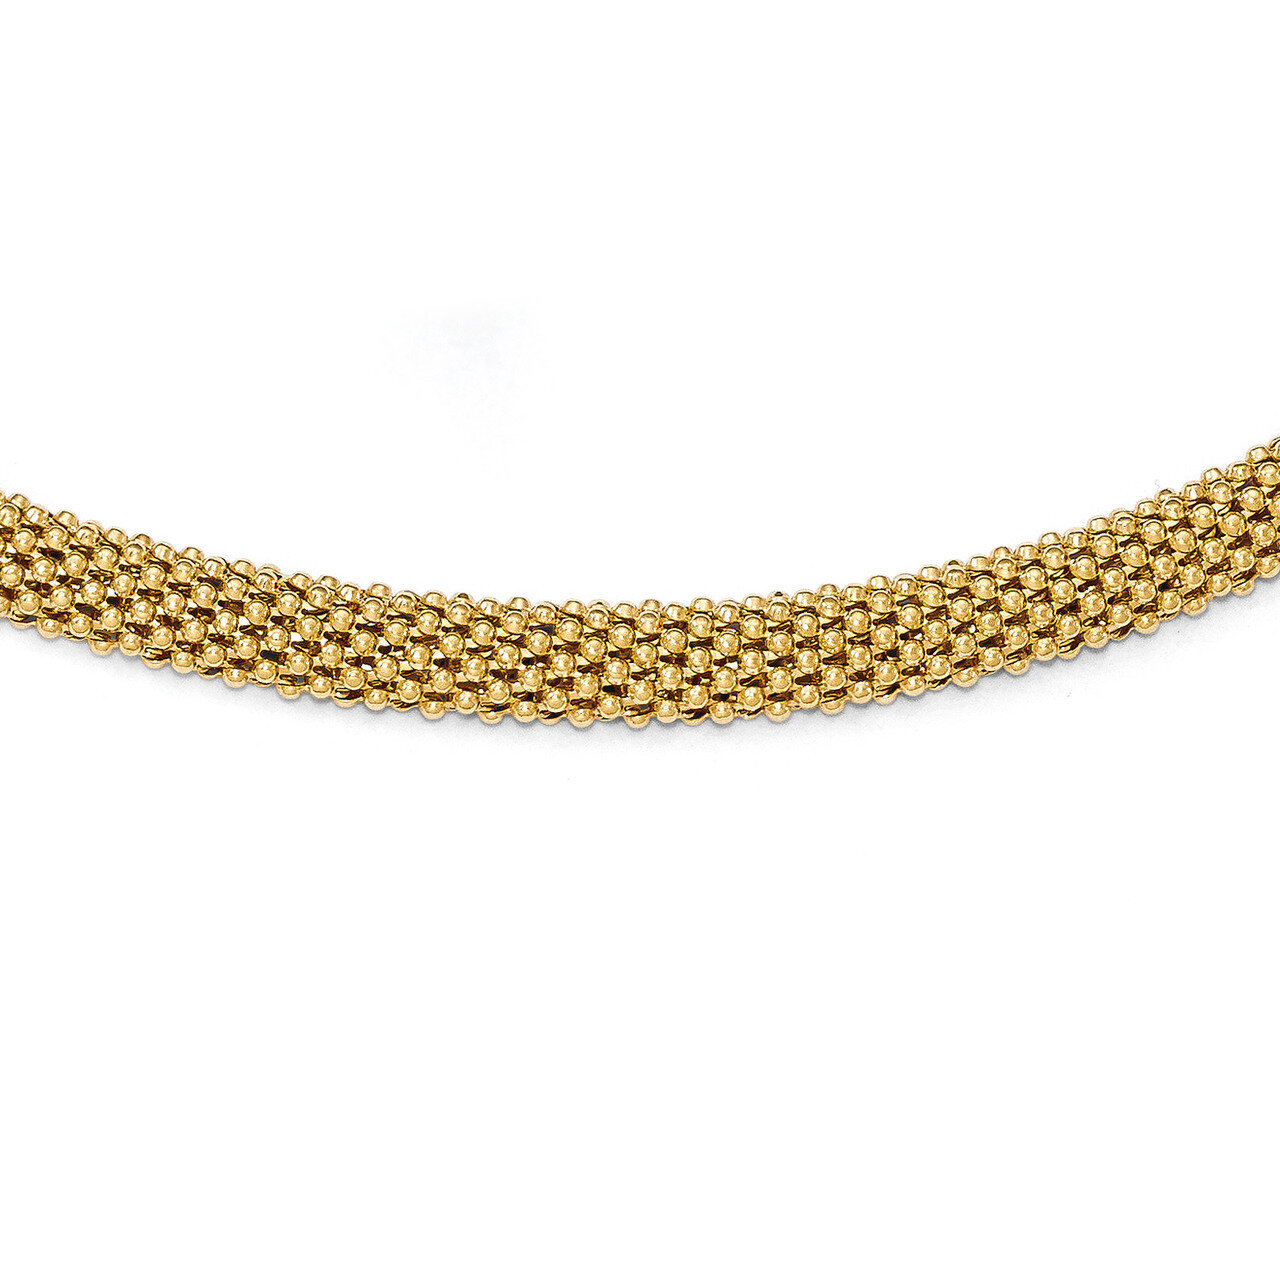 Polished Mesh Necklace 18 Inch Sterling Silver Gold-tone HB-QLF533-18